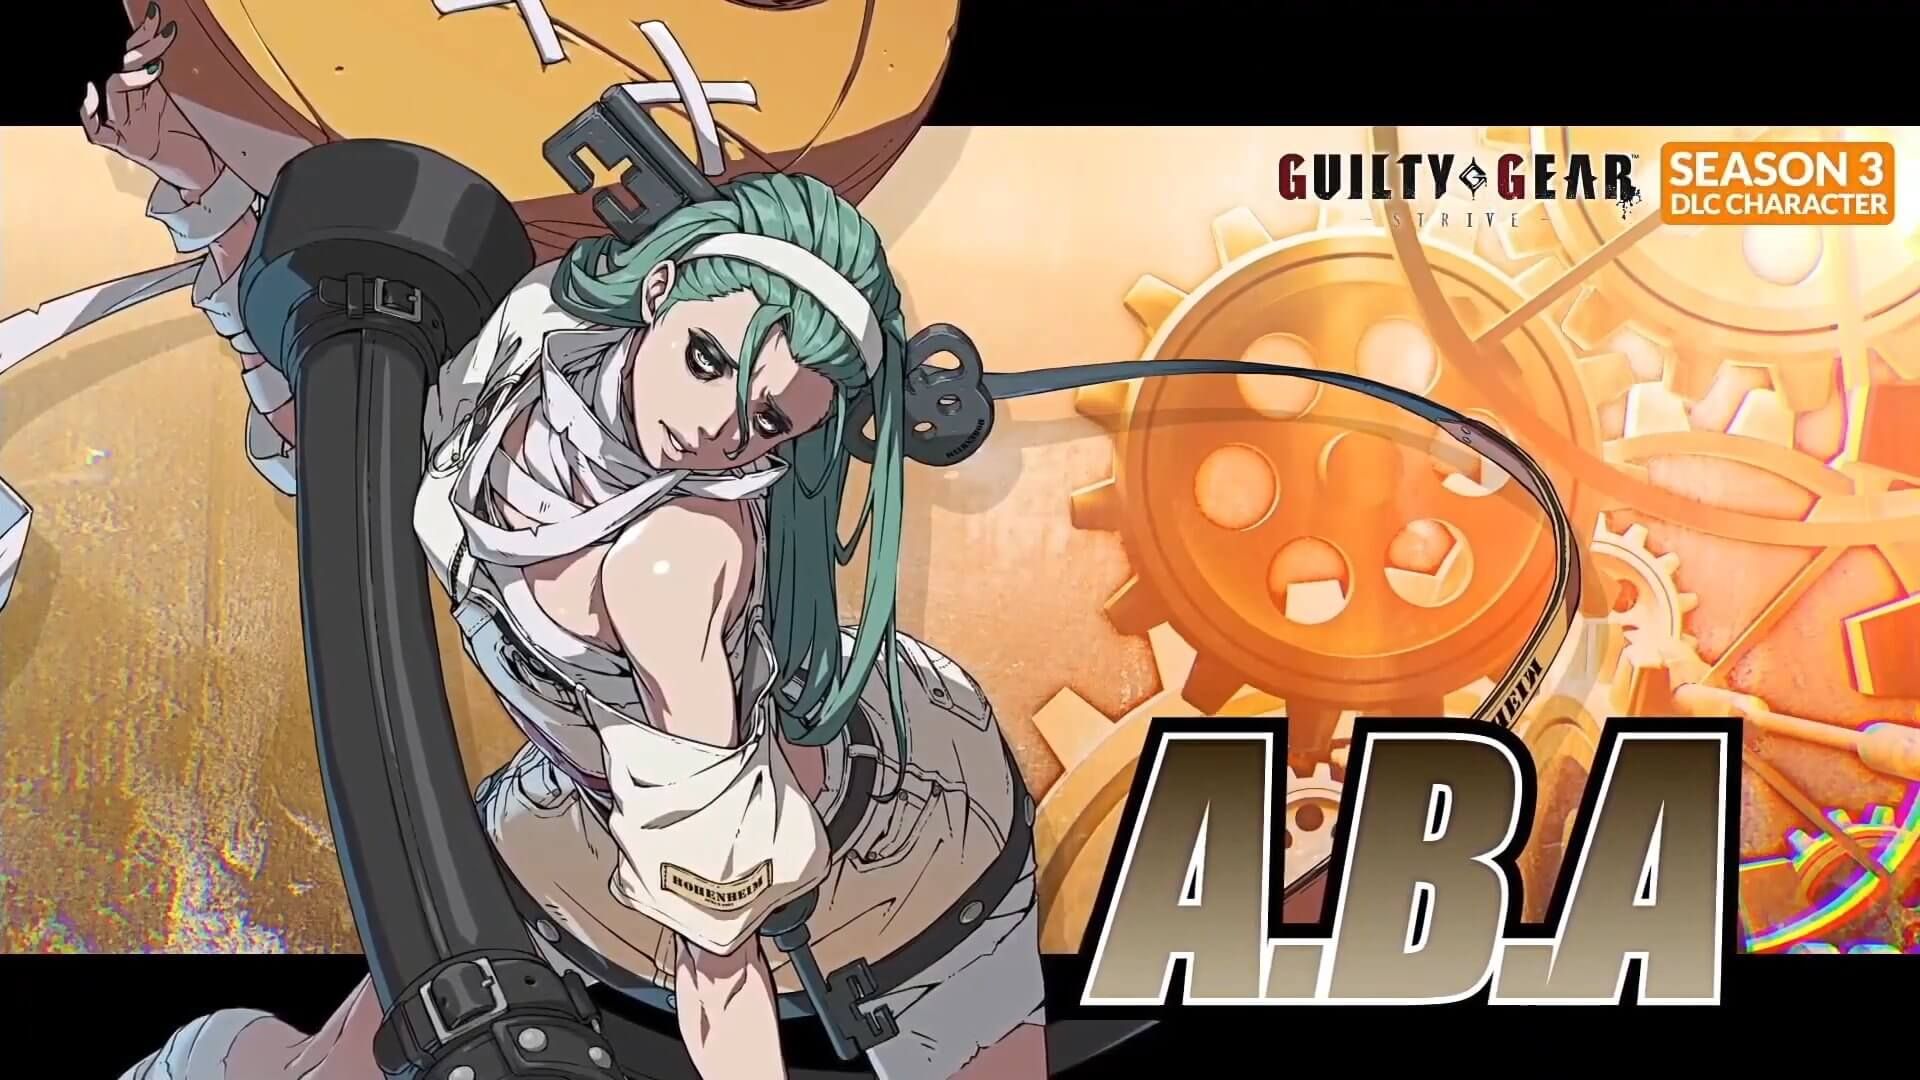 A.B.A Will Be GGST's Next Playable Character